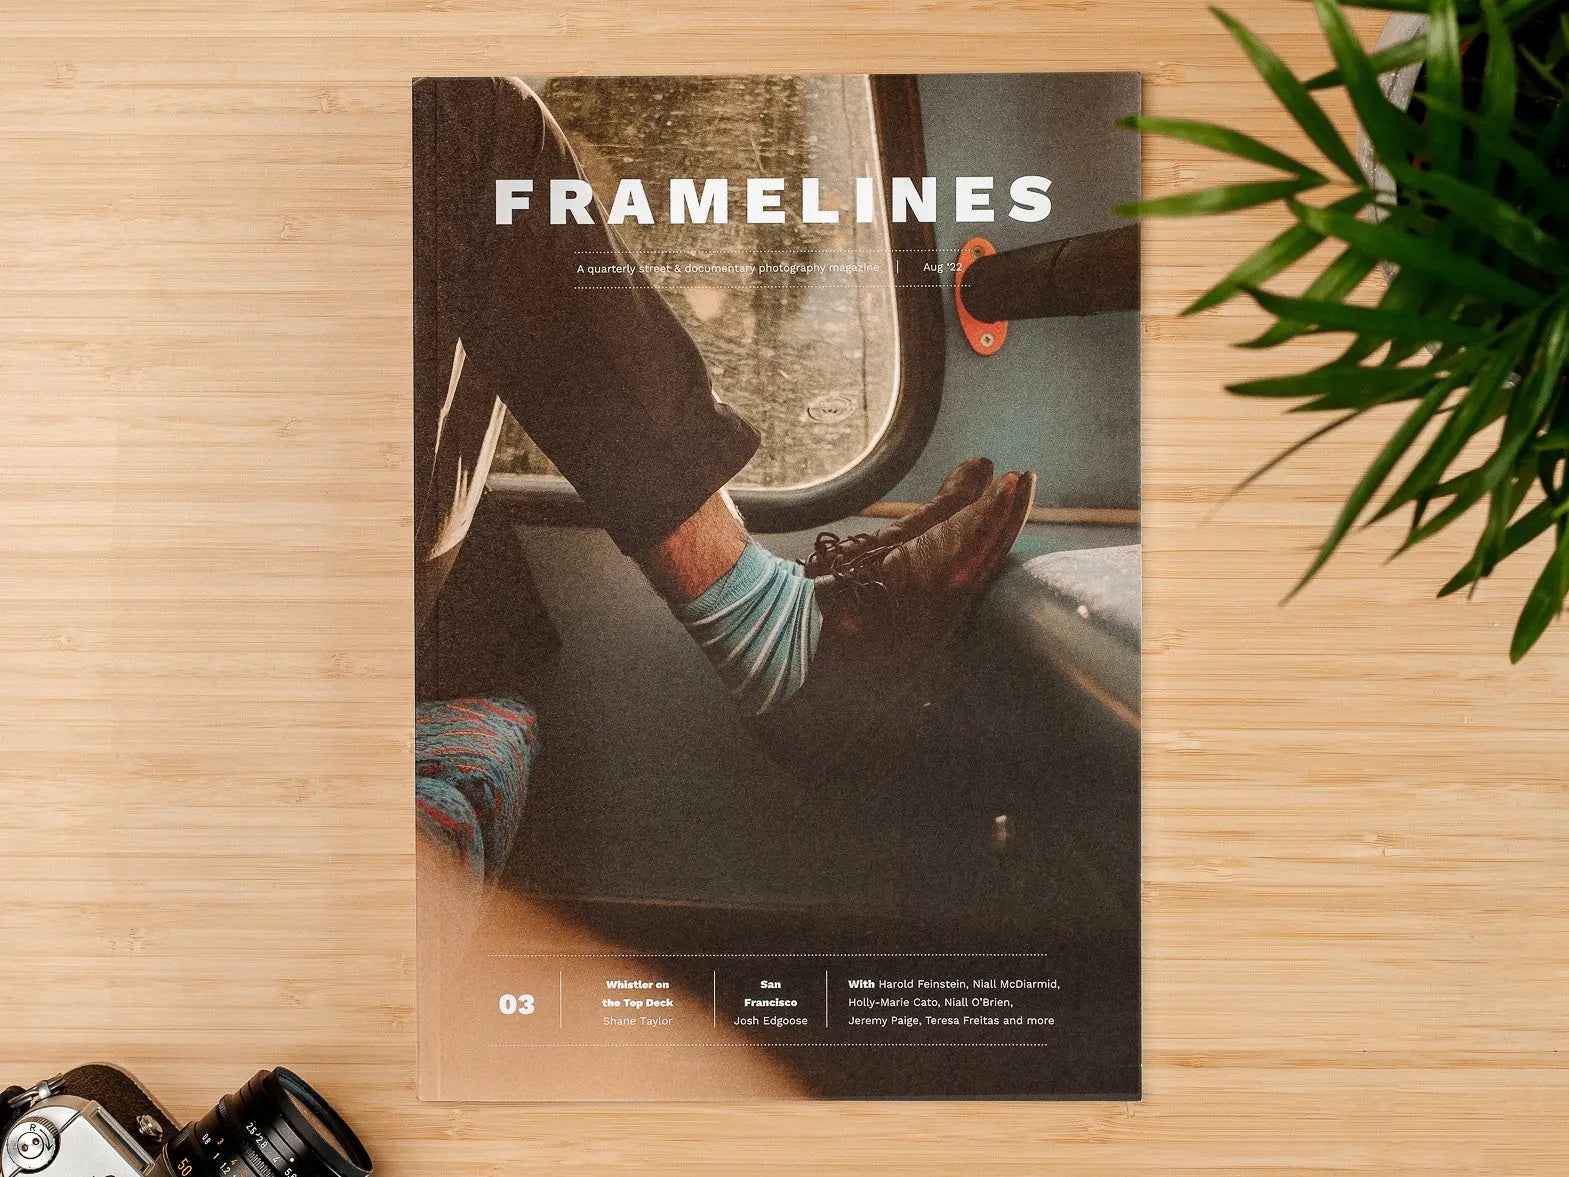 Framelines 03 with Harold Feinstein, Jeremy Paige, Niall McDiarmid, Holly-Marie Cato, Teresa Freitas and Niall O'Brien